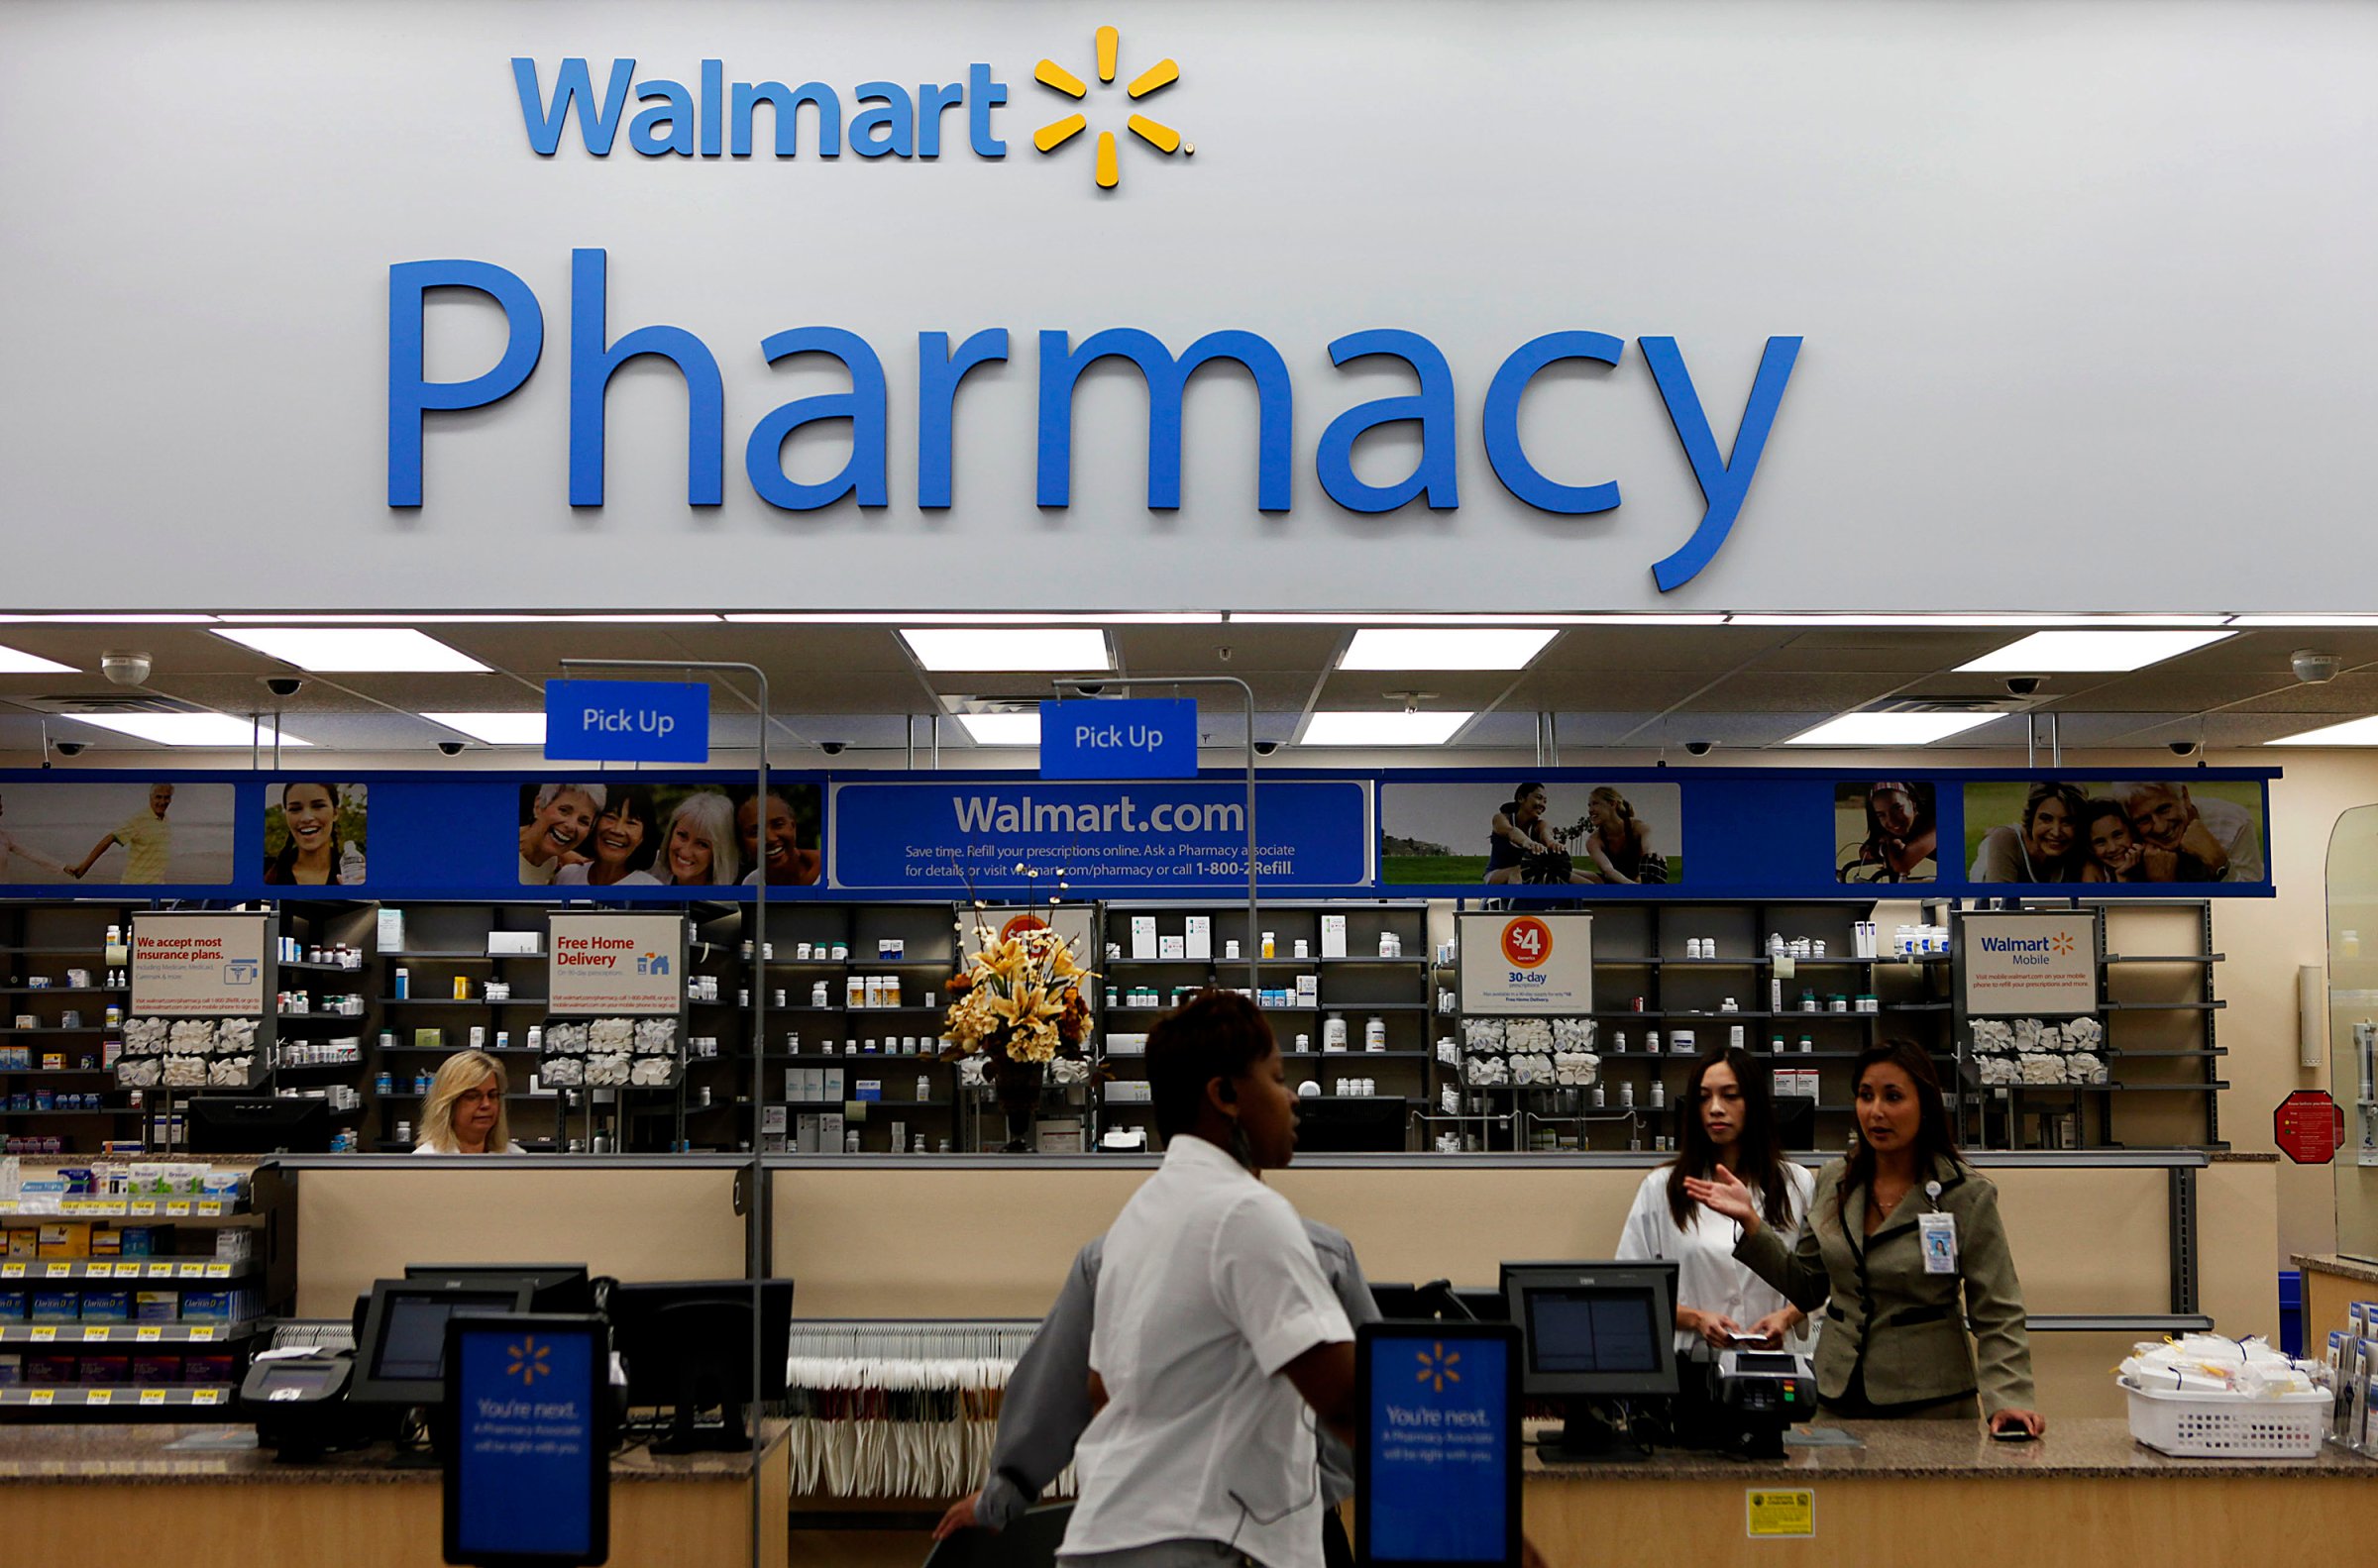 A customer walks past the pharmacy during the grand opening of a new Wal-Mart Stores Inc. location in Torrance, California, U.S., on Wednesday, Sept. 12, 2012